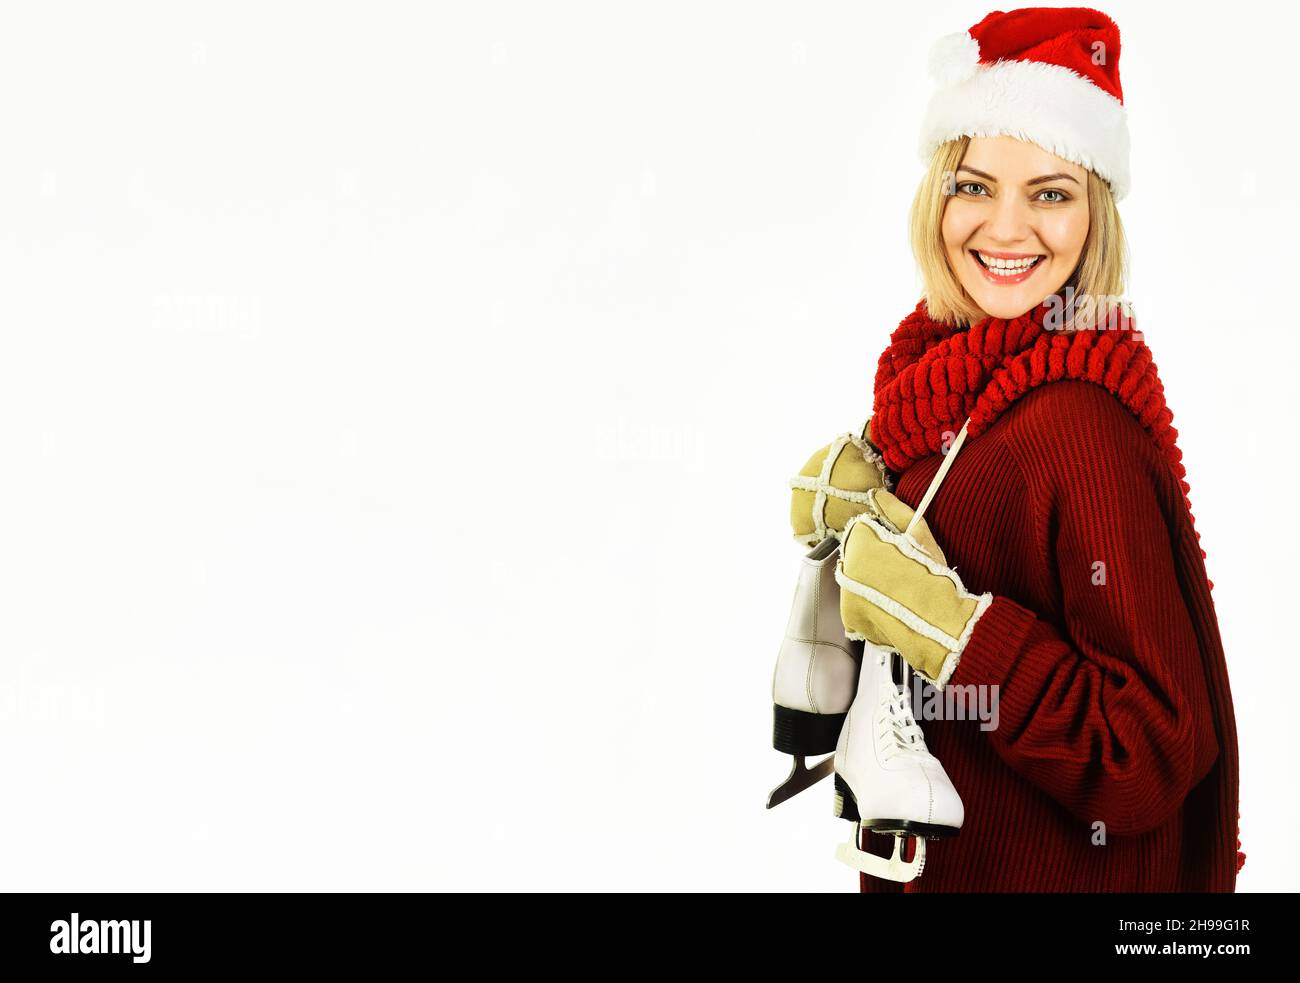 Smiling woman with ice skates. Beautiful girl in Santa hat with figure skates. Winter sport activity. Copy space Stock Photo